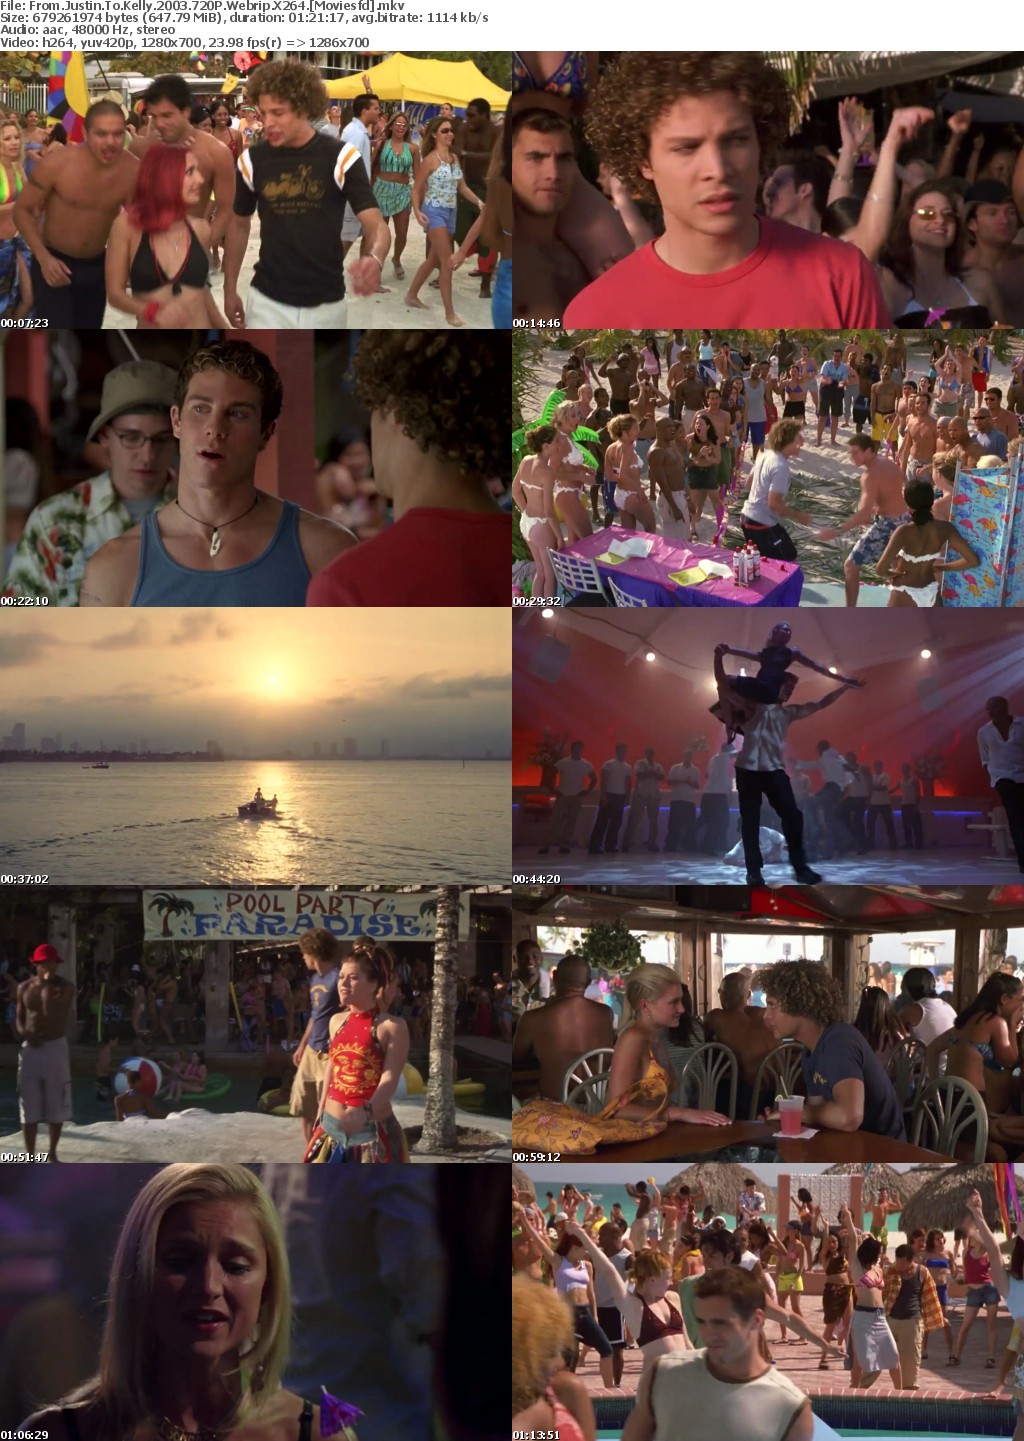 From Justin To Kelly (2003) 720p WebRip x264 - MoviesFD